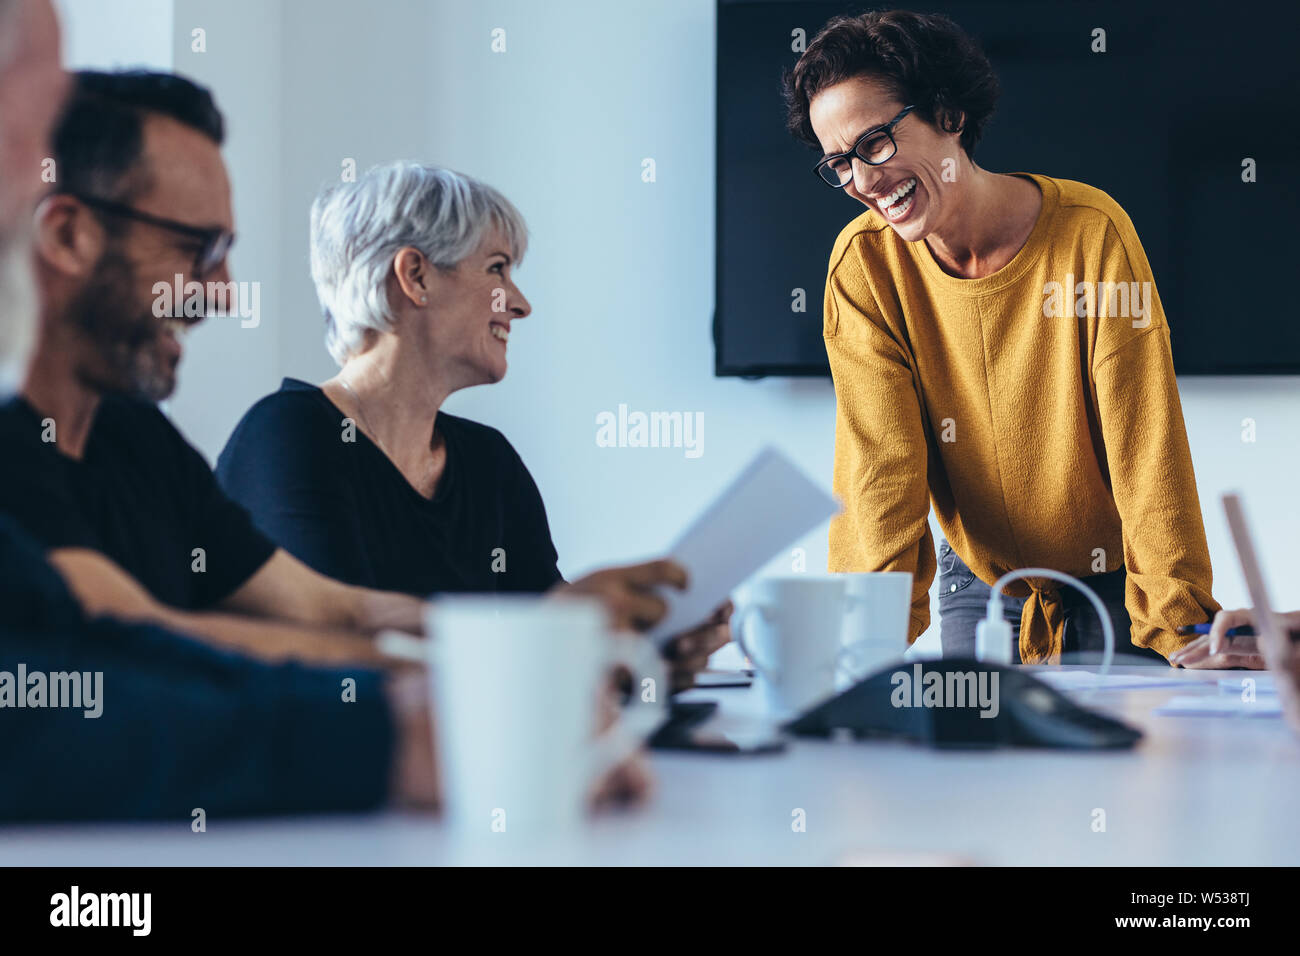 Group of businesspeople smiling during a meeting in conference room. Business people having casual discussion during meeting in board room. Stock Photo